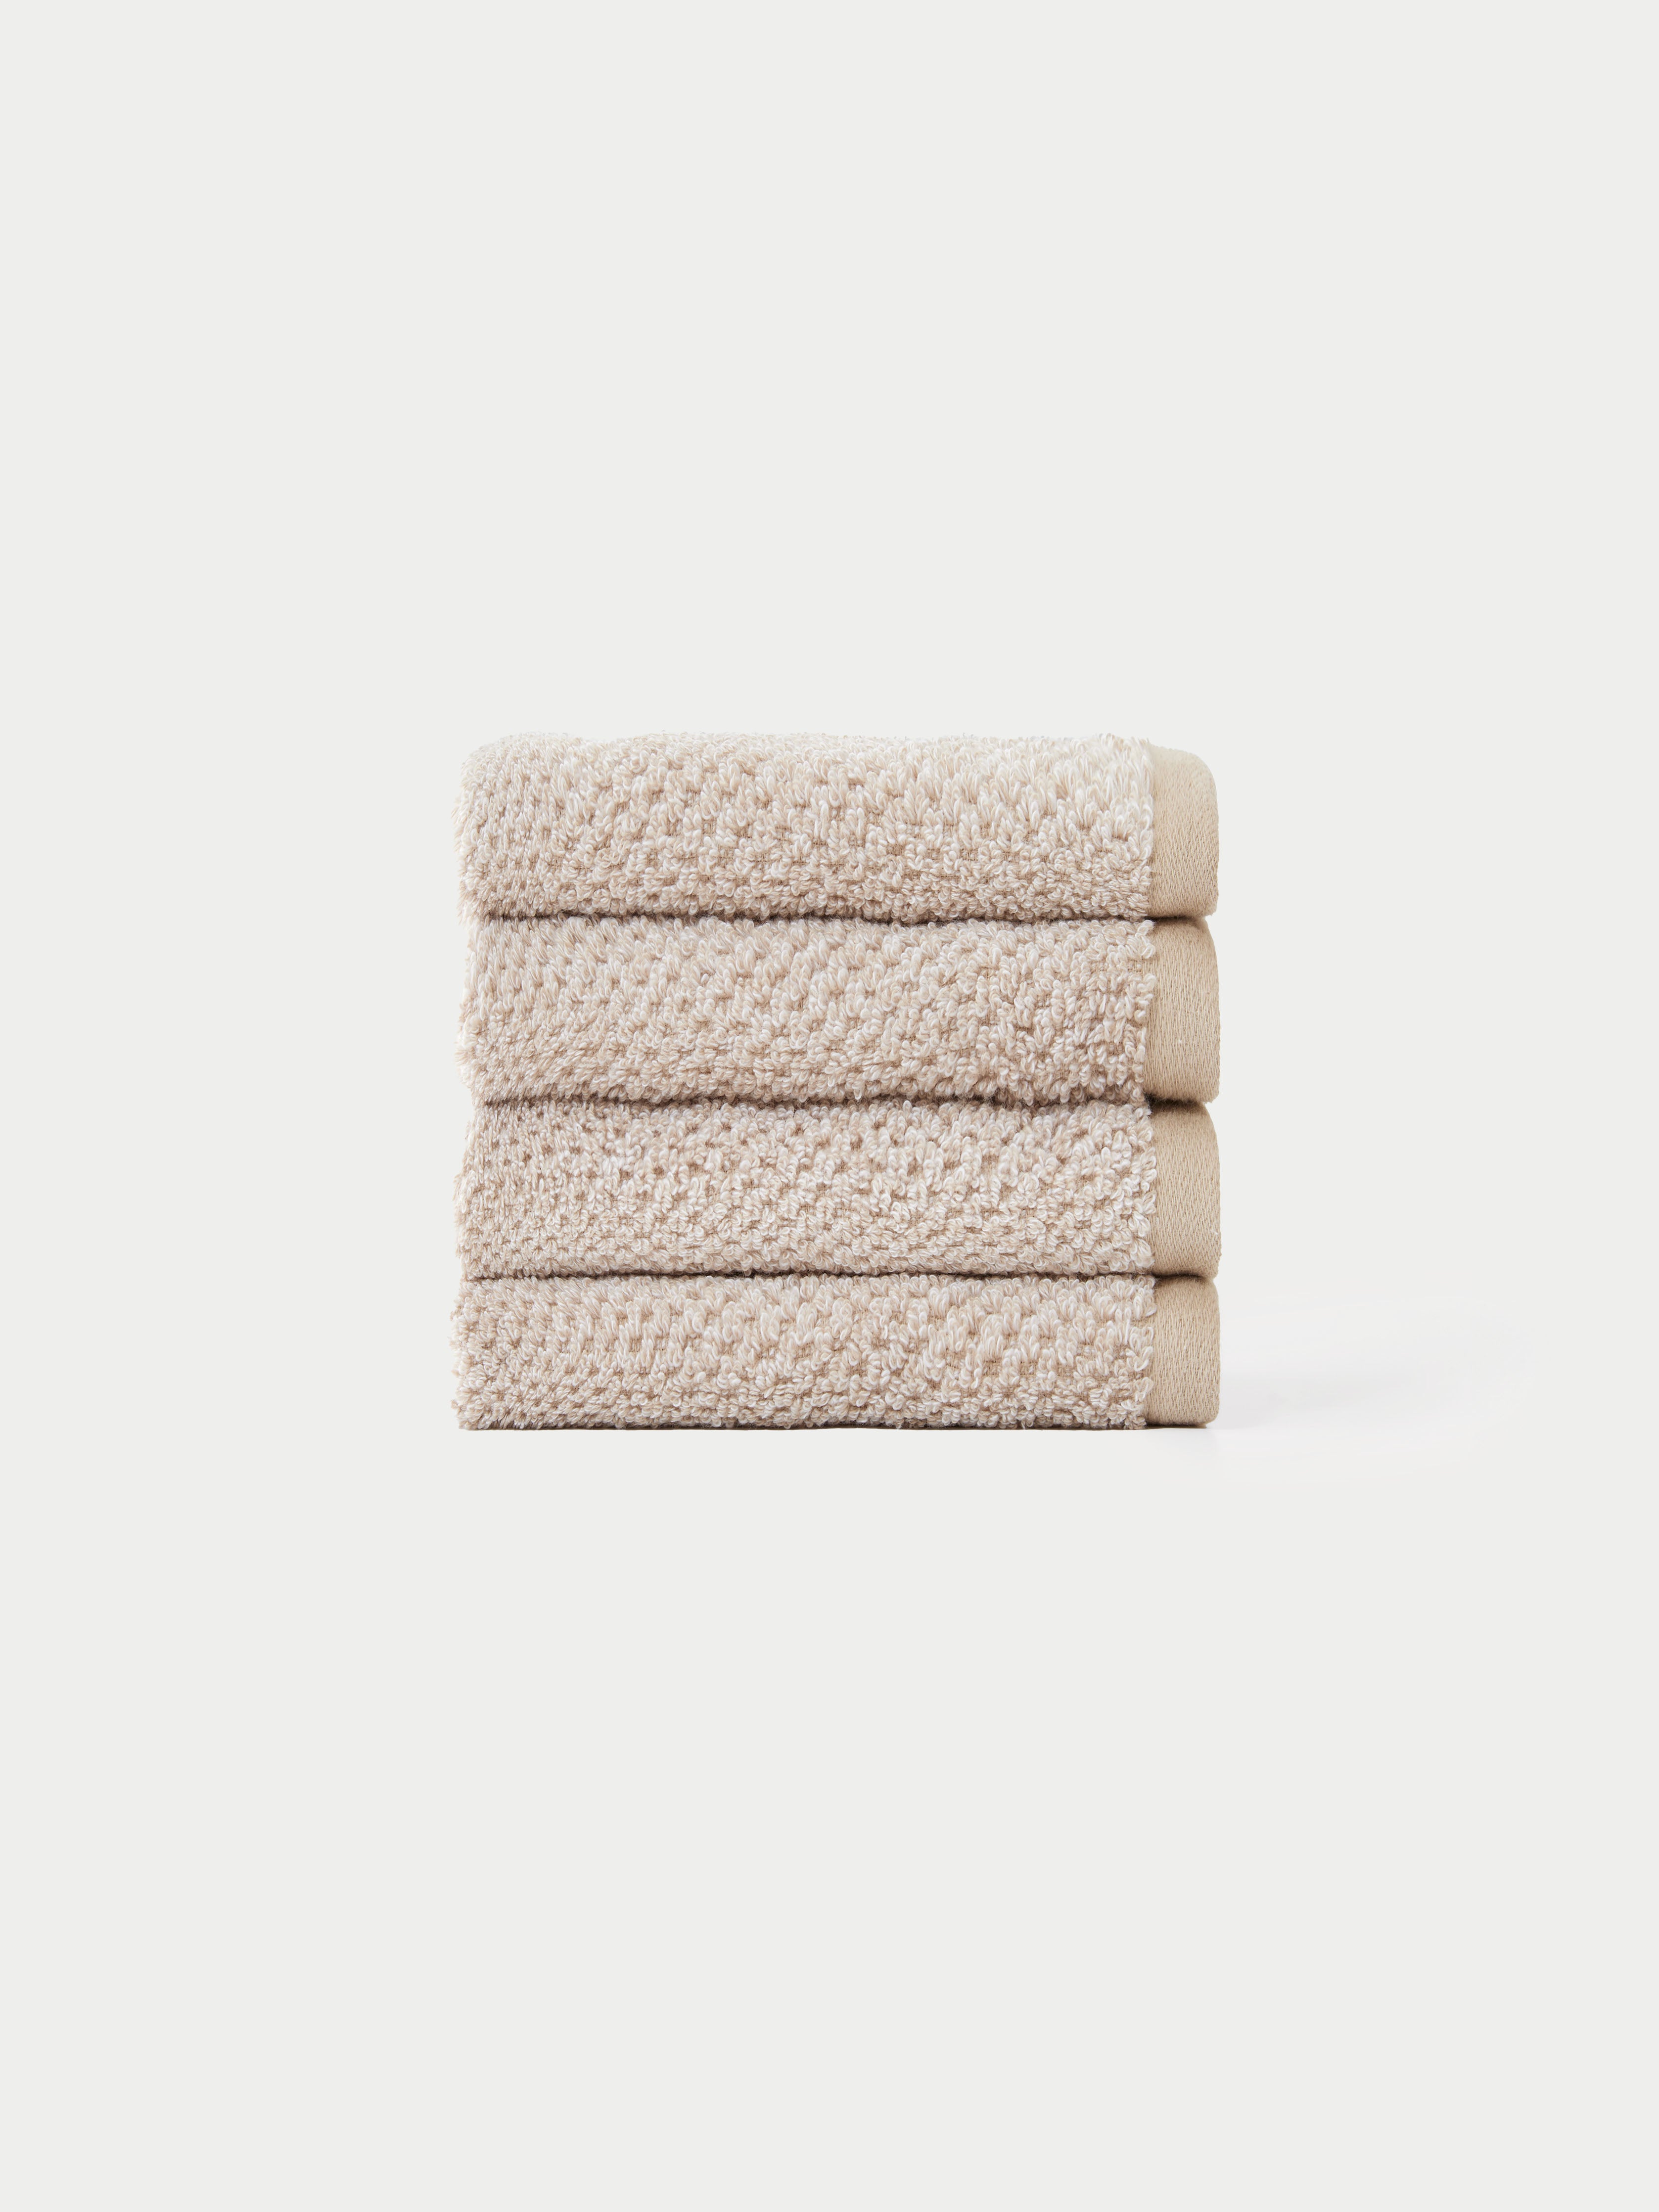 Nantucket Wash Cloths in the color Heathered Sand. The Wash Cloths are neatly folded. The photo of the wash cloths was taken with a white background.|Color:Heathered Sand